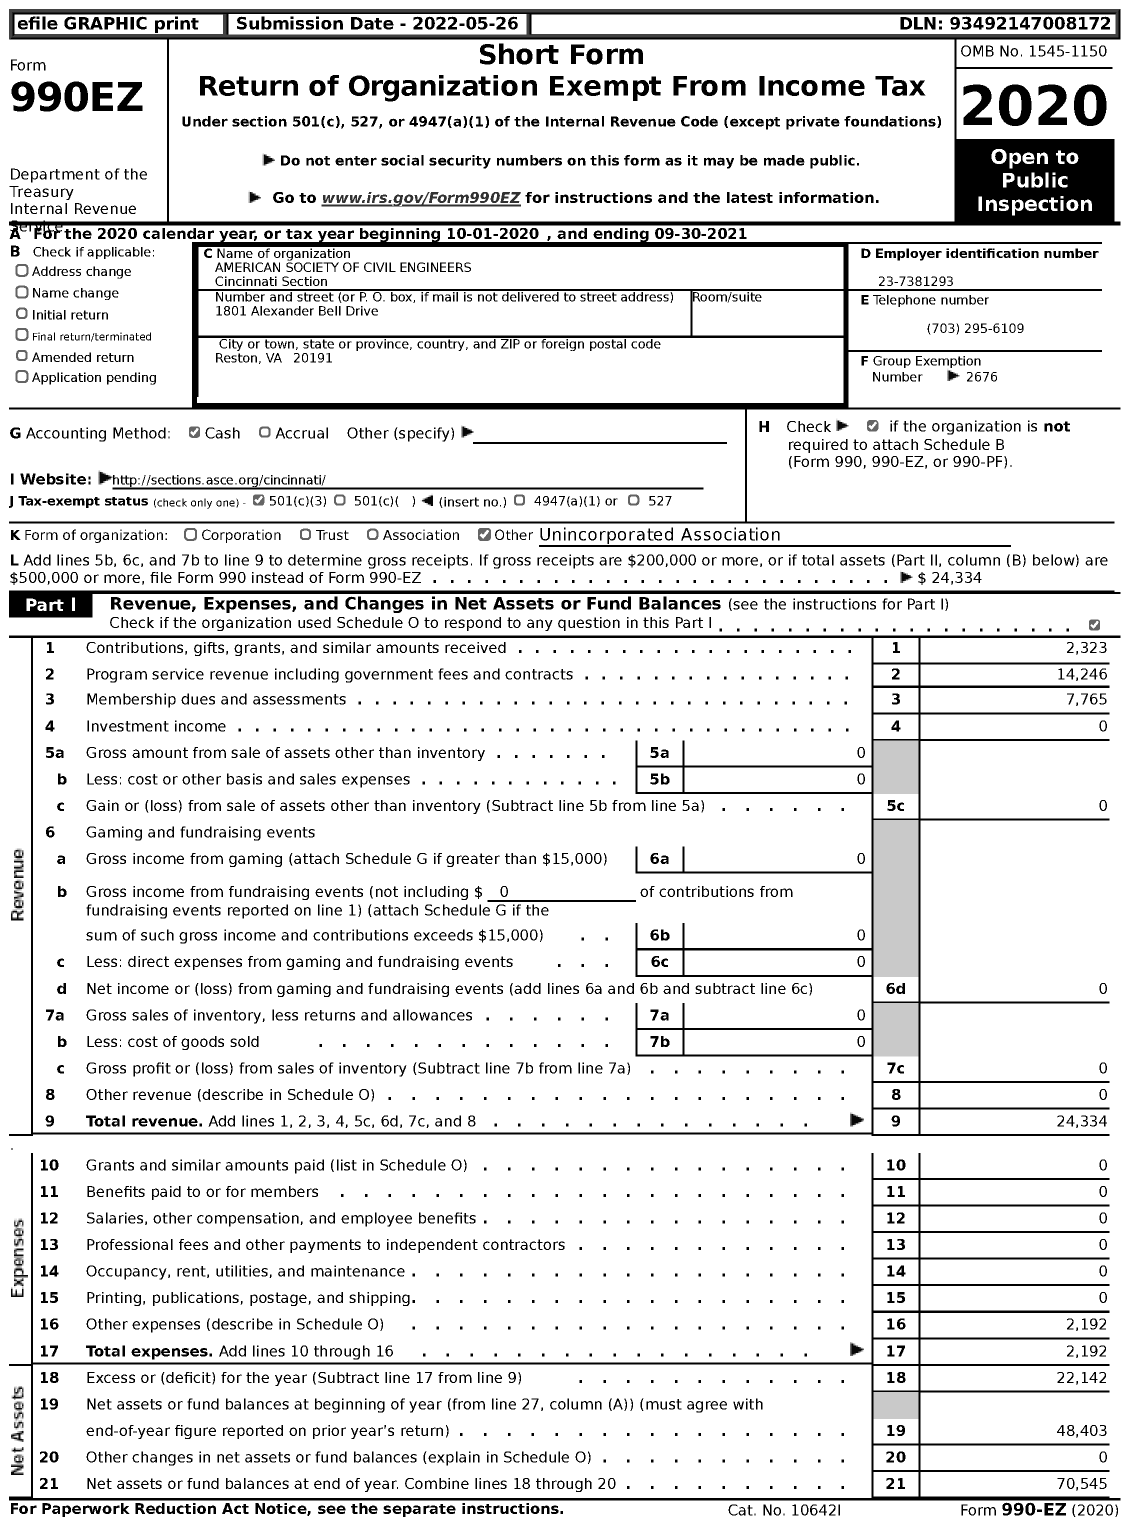 Image of first page of 2020 Form 990EZ for AMERICAN SOCIETY OF CIVIL ENGINEERS / Cincinnati Section